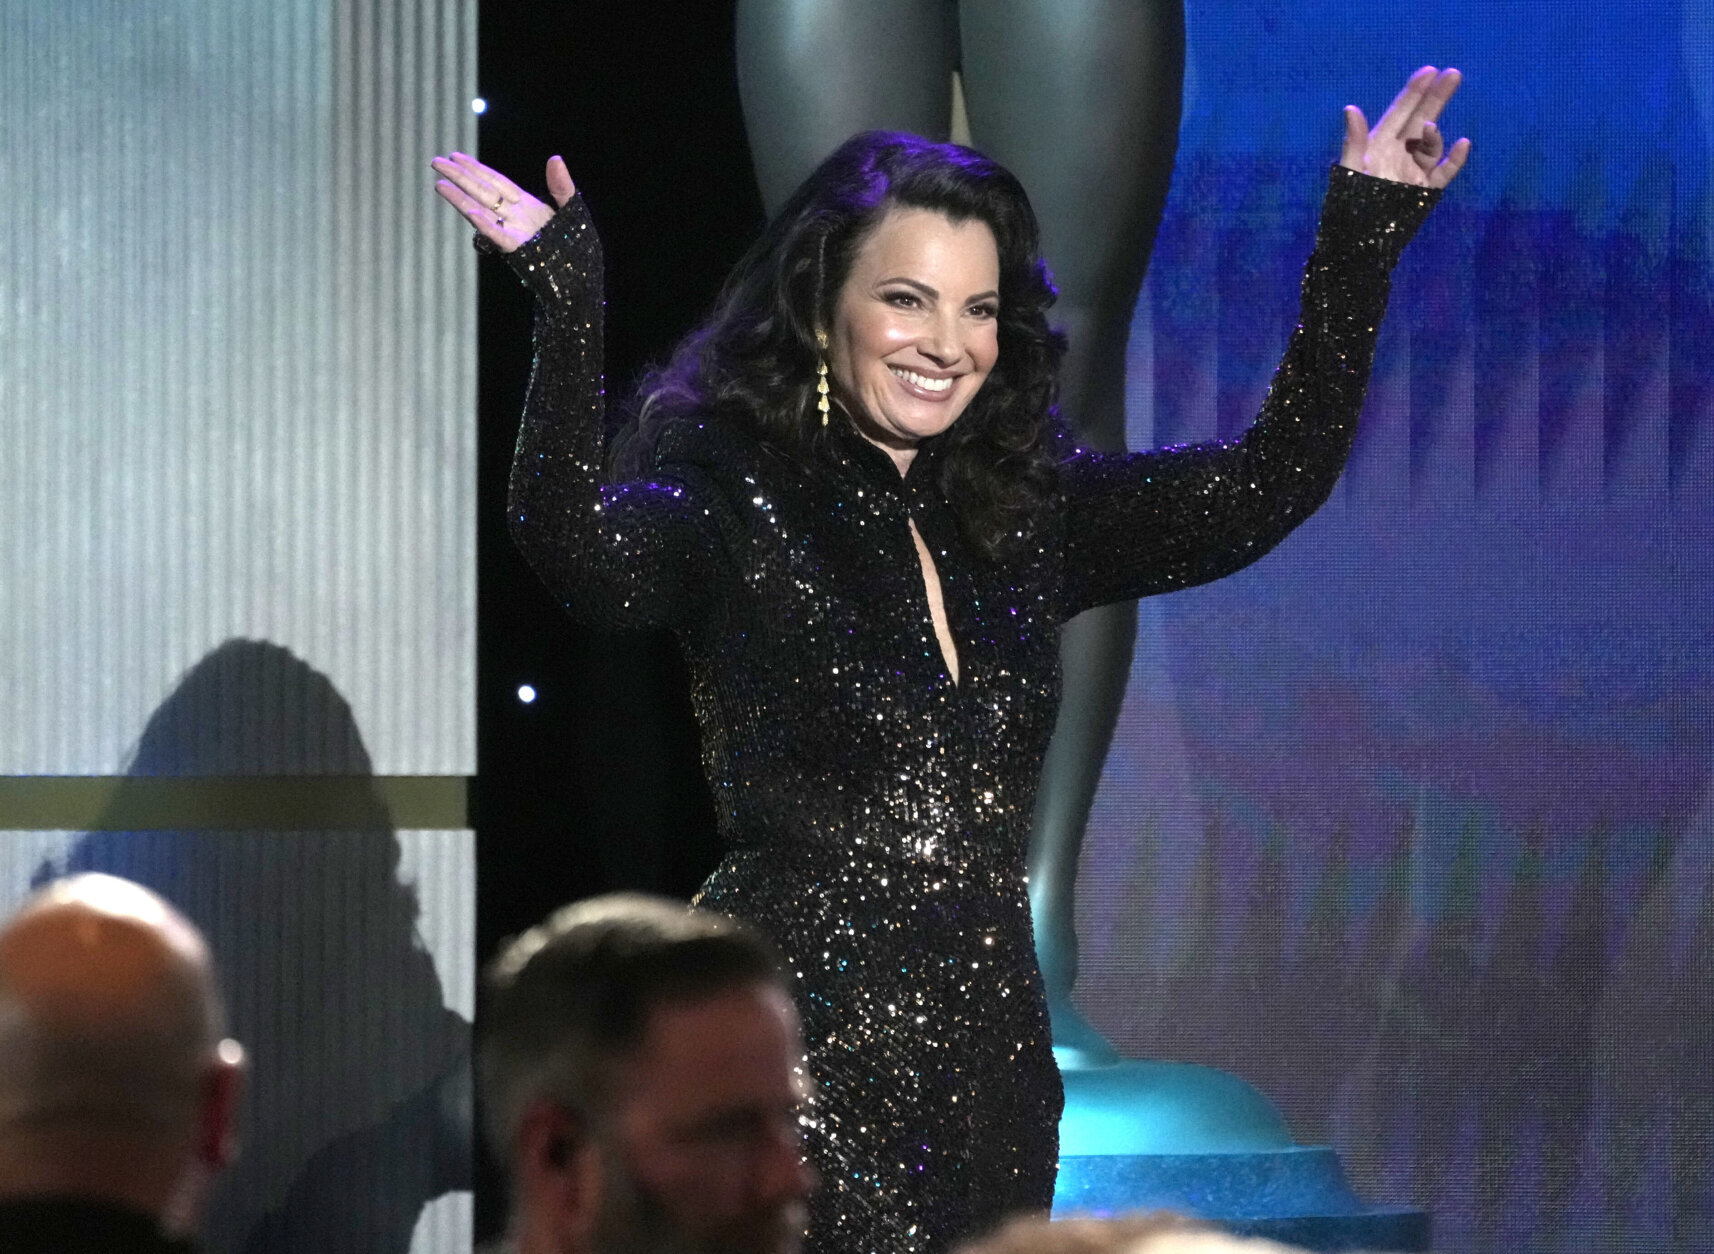 SAG-AFTRA President Fran Drescher speaks at the 29th annual Screen Actors Guild Awards on Sunday, Feb. 26, 2023, at the Fairmont Century Plaza in Los Angeles. (AP Photo/Chris Pizzello)